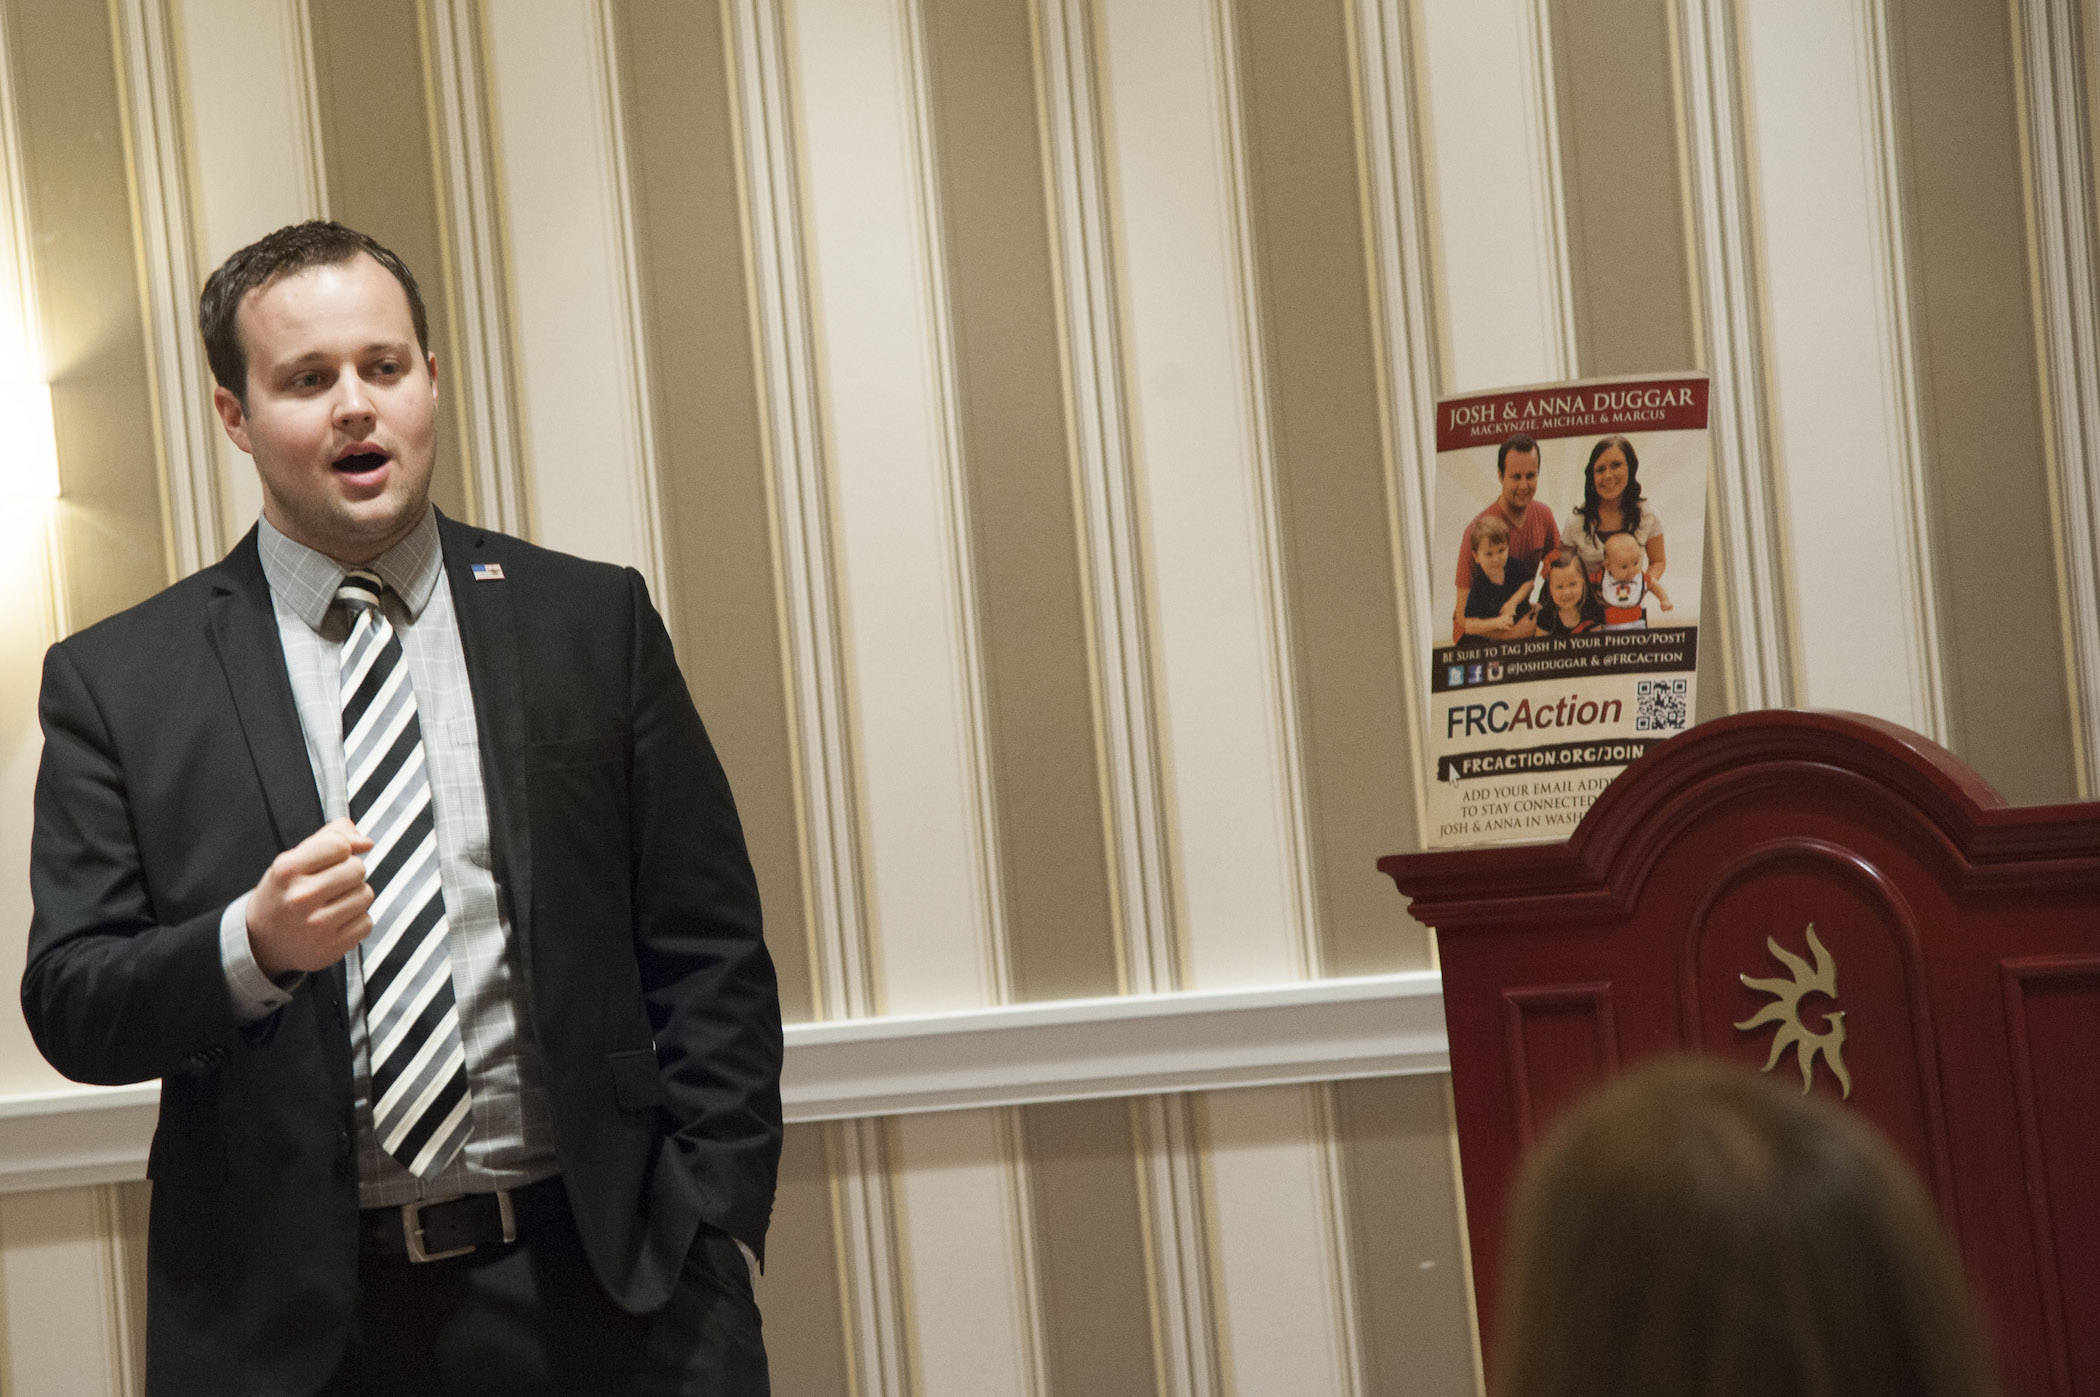 Josh Duggar wearing a suit to attend a conference